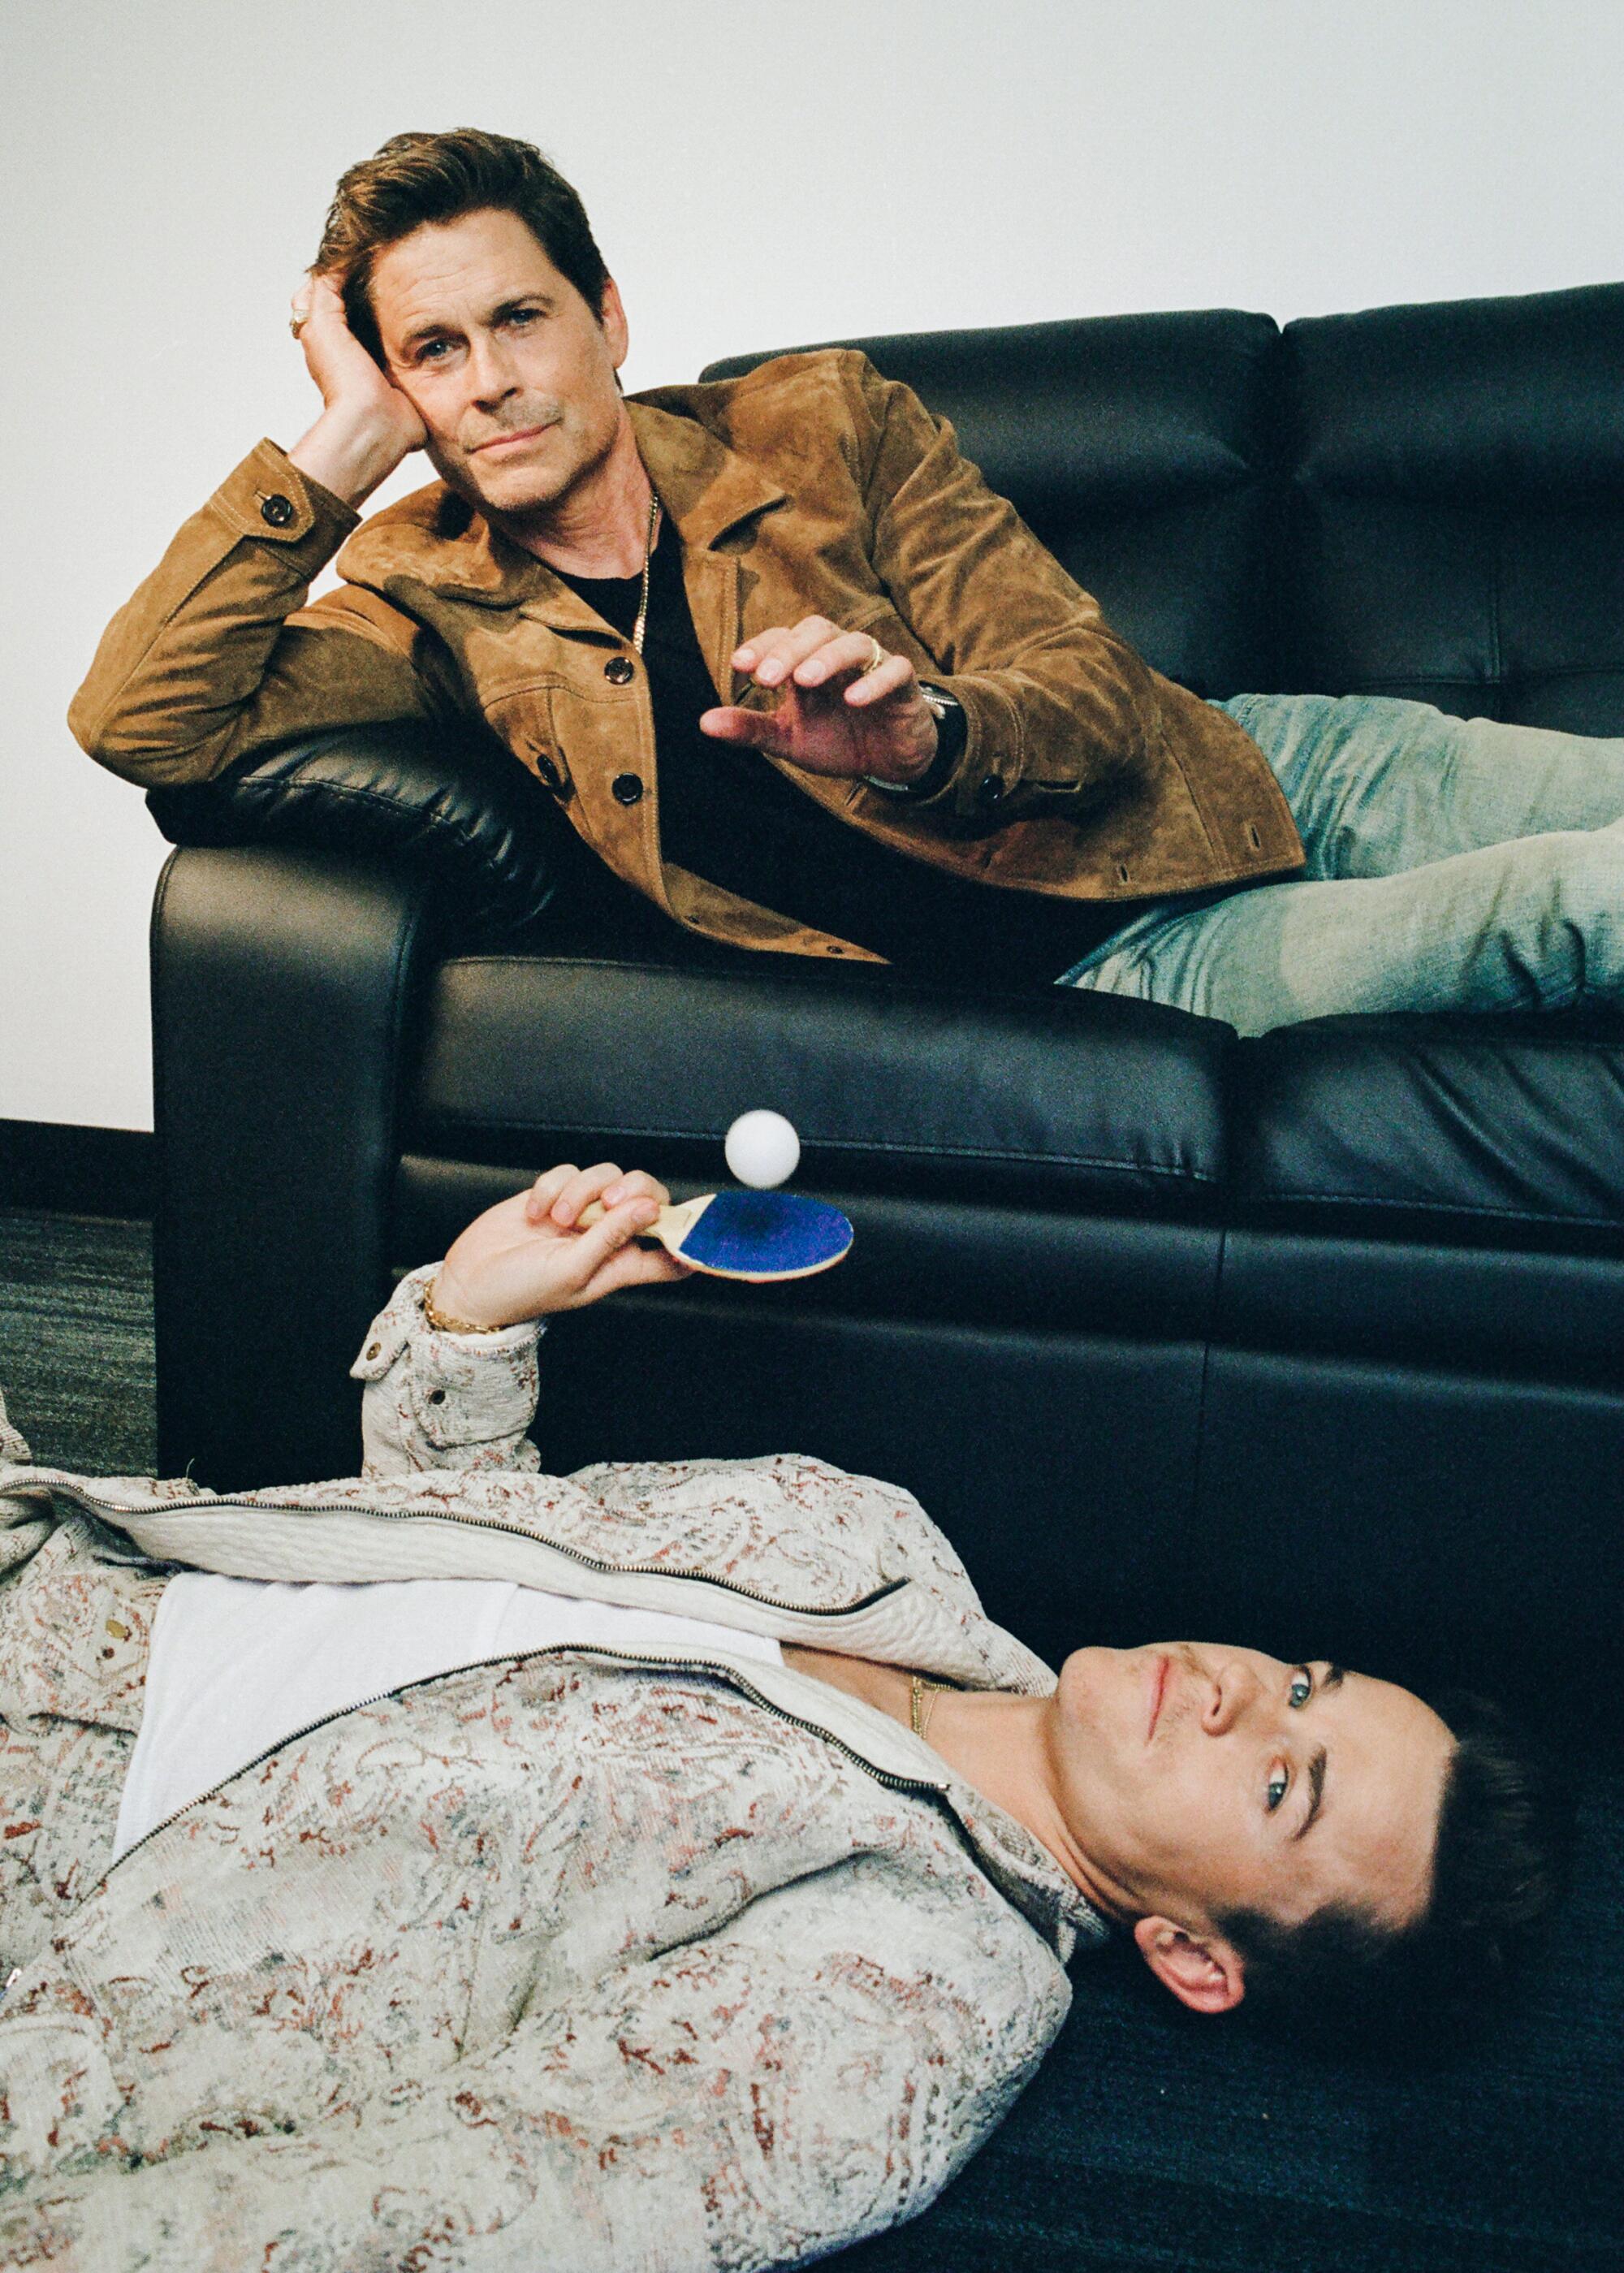 Rob Lowe lies on a couch and drops a ping pong ball on a paddle being held up by his son John Owen Lowe, lying on the floor.